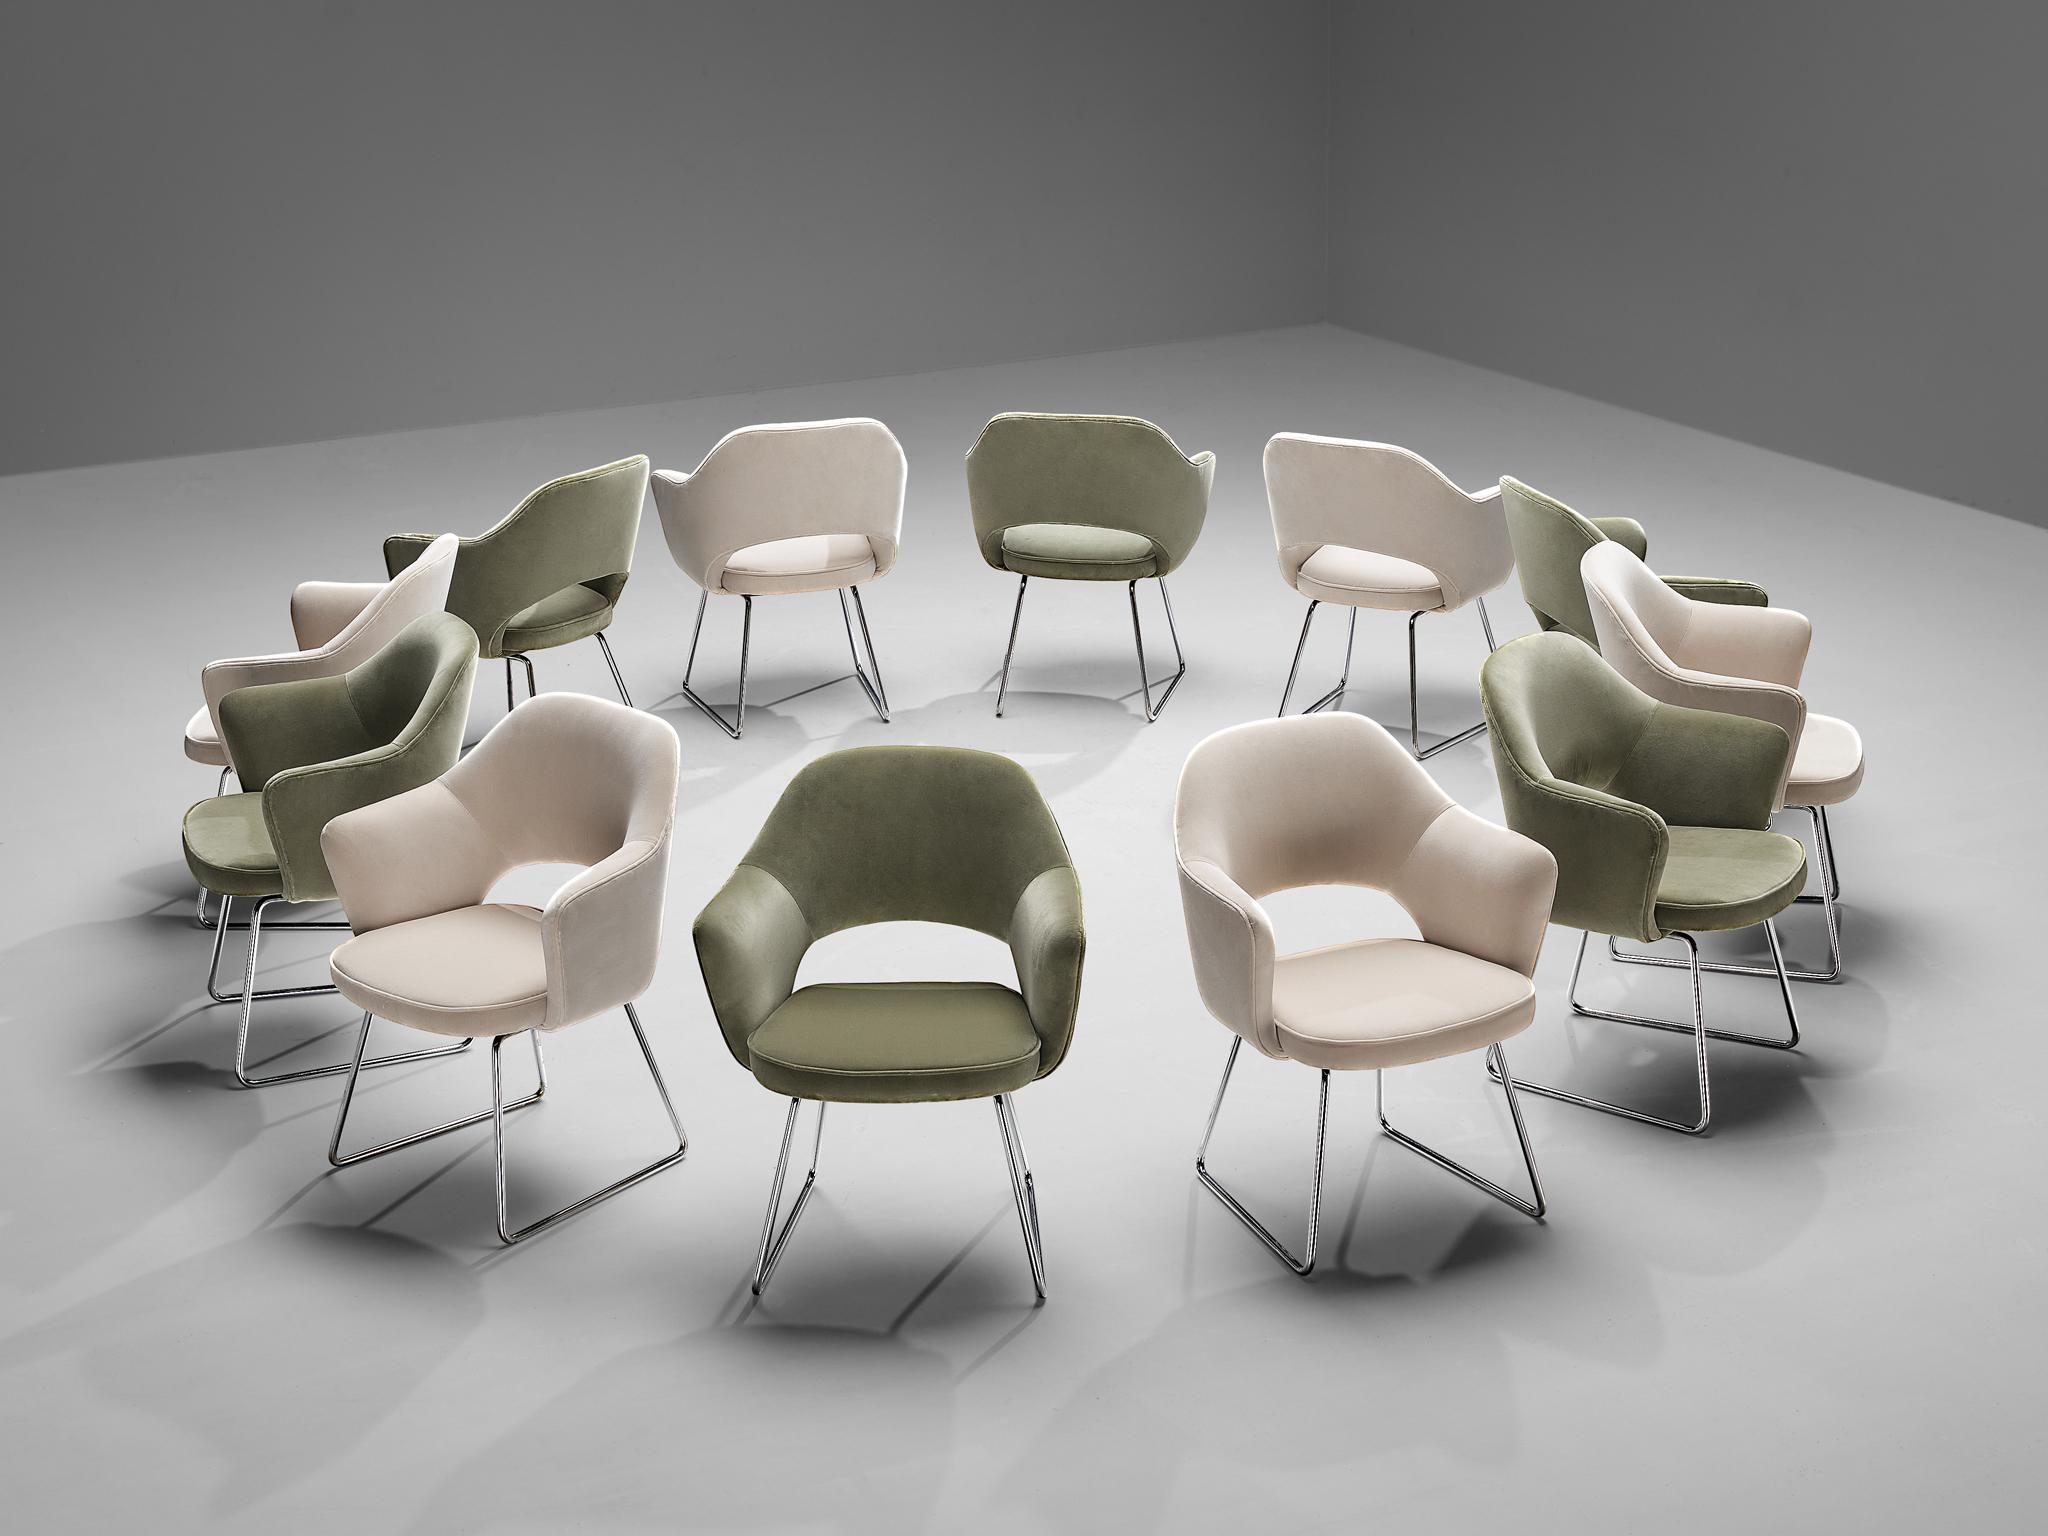 Eero Saarinen for Knoll International, limited edition ‘Conference’ armchairs, velvet, coated metal, France, Paris, designed in 1957

This set of armchairs was commissioned by the UNESCO Headquarters located in Paris. This iconic building was